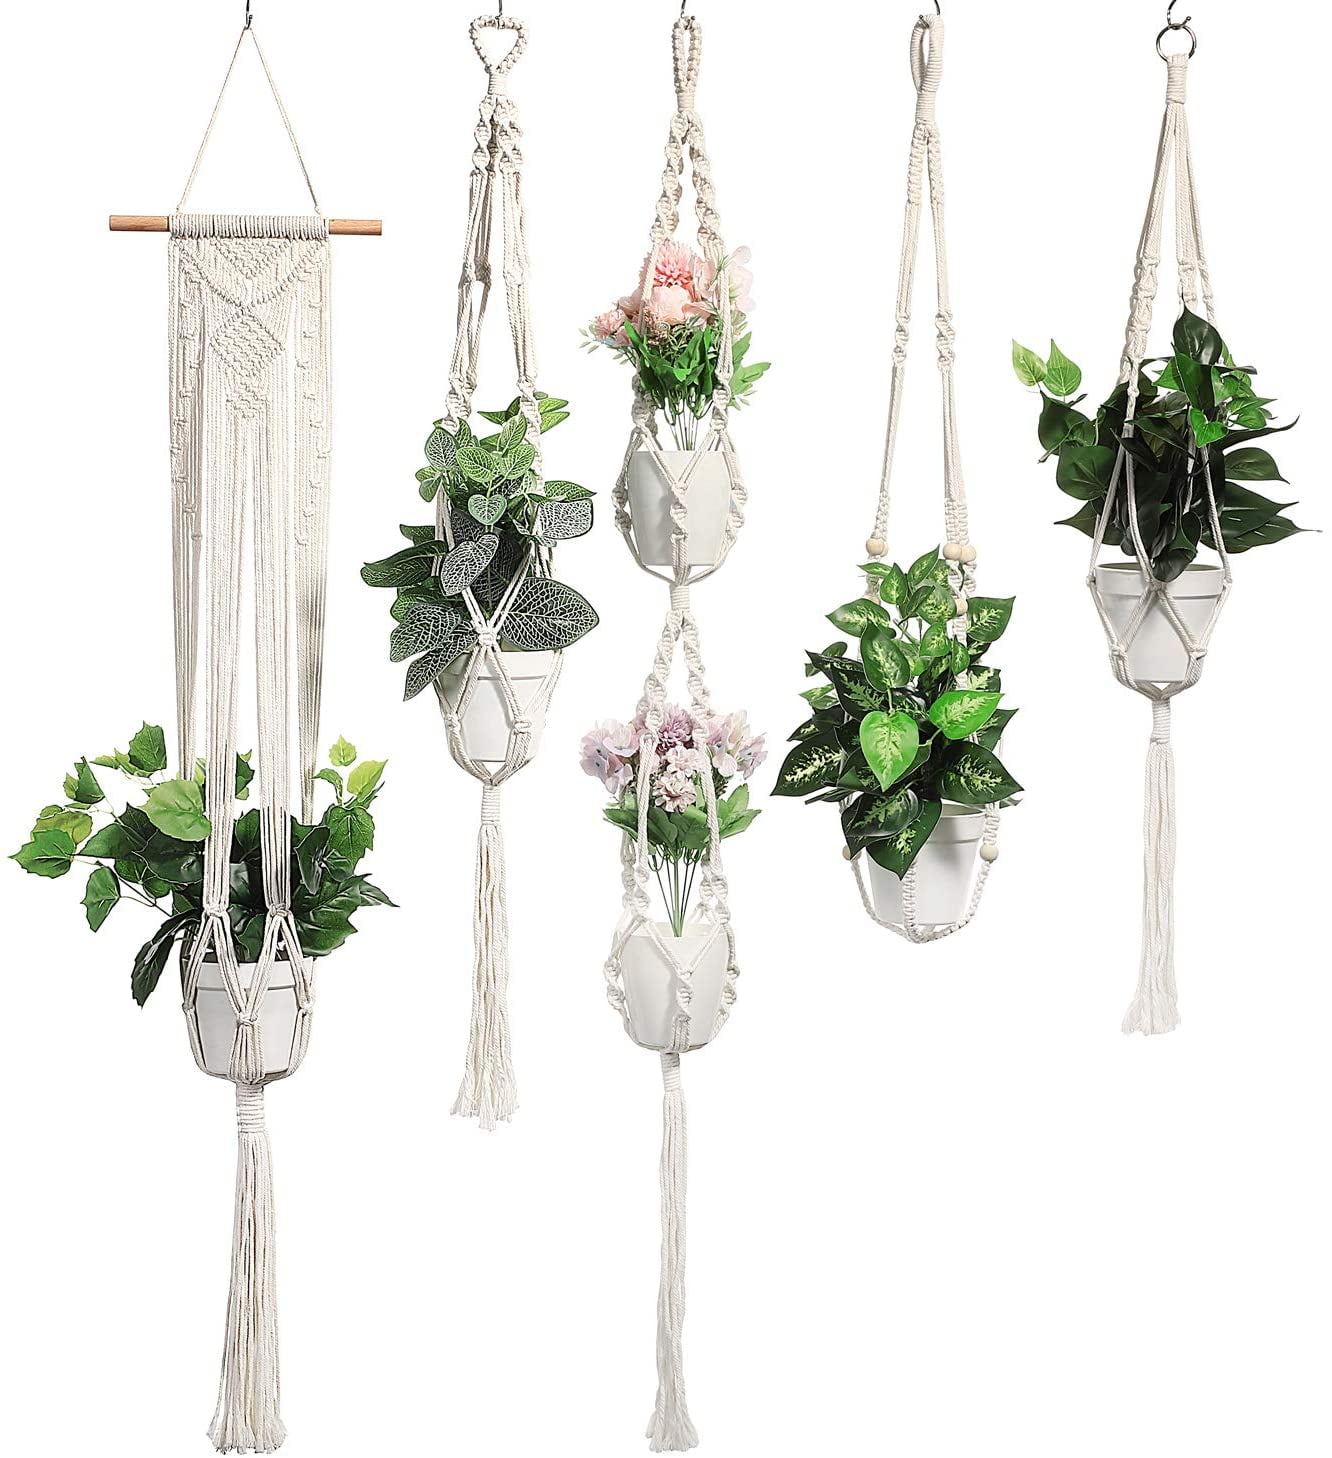 ANGTUO Macrame Plant Hangers Shelf Holder Hanging Planter Stand Flower Pots for 